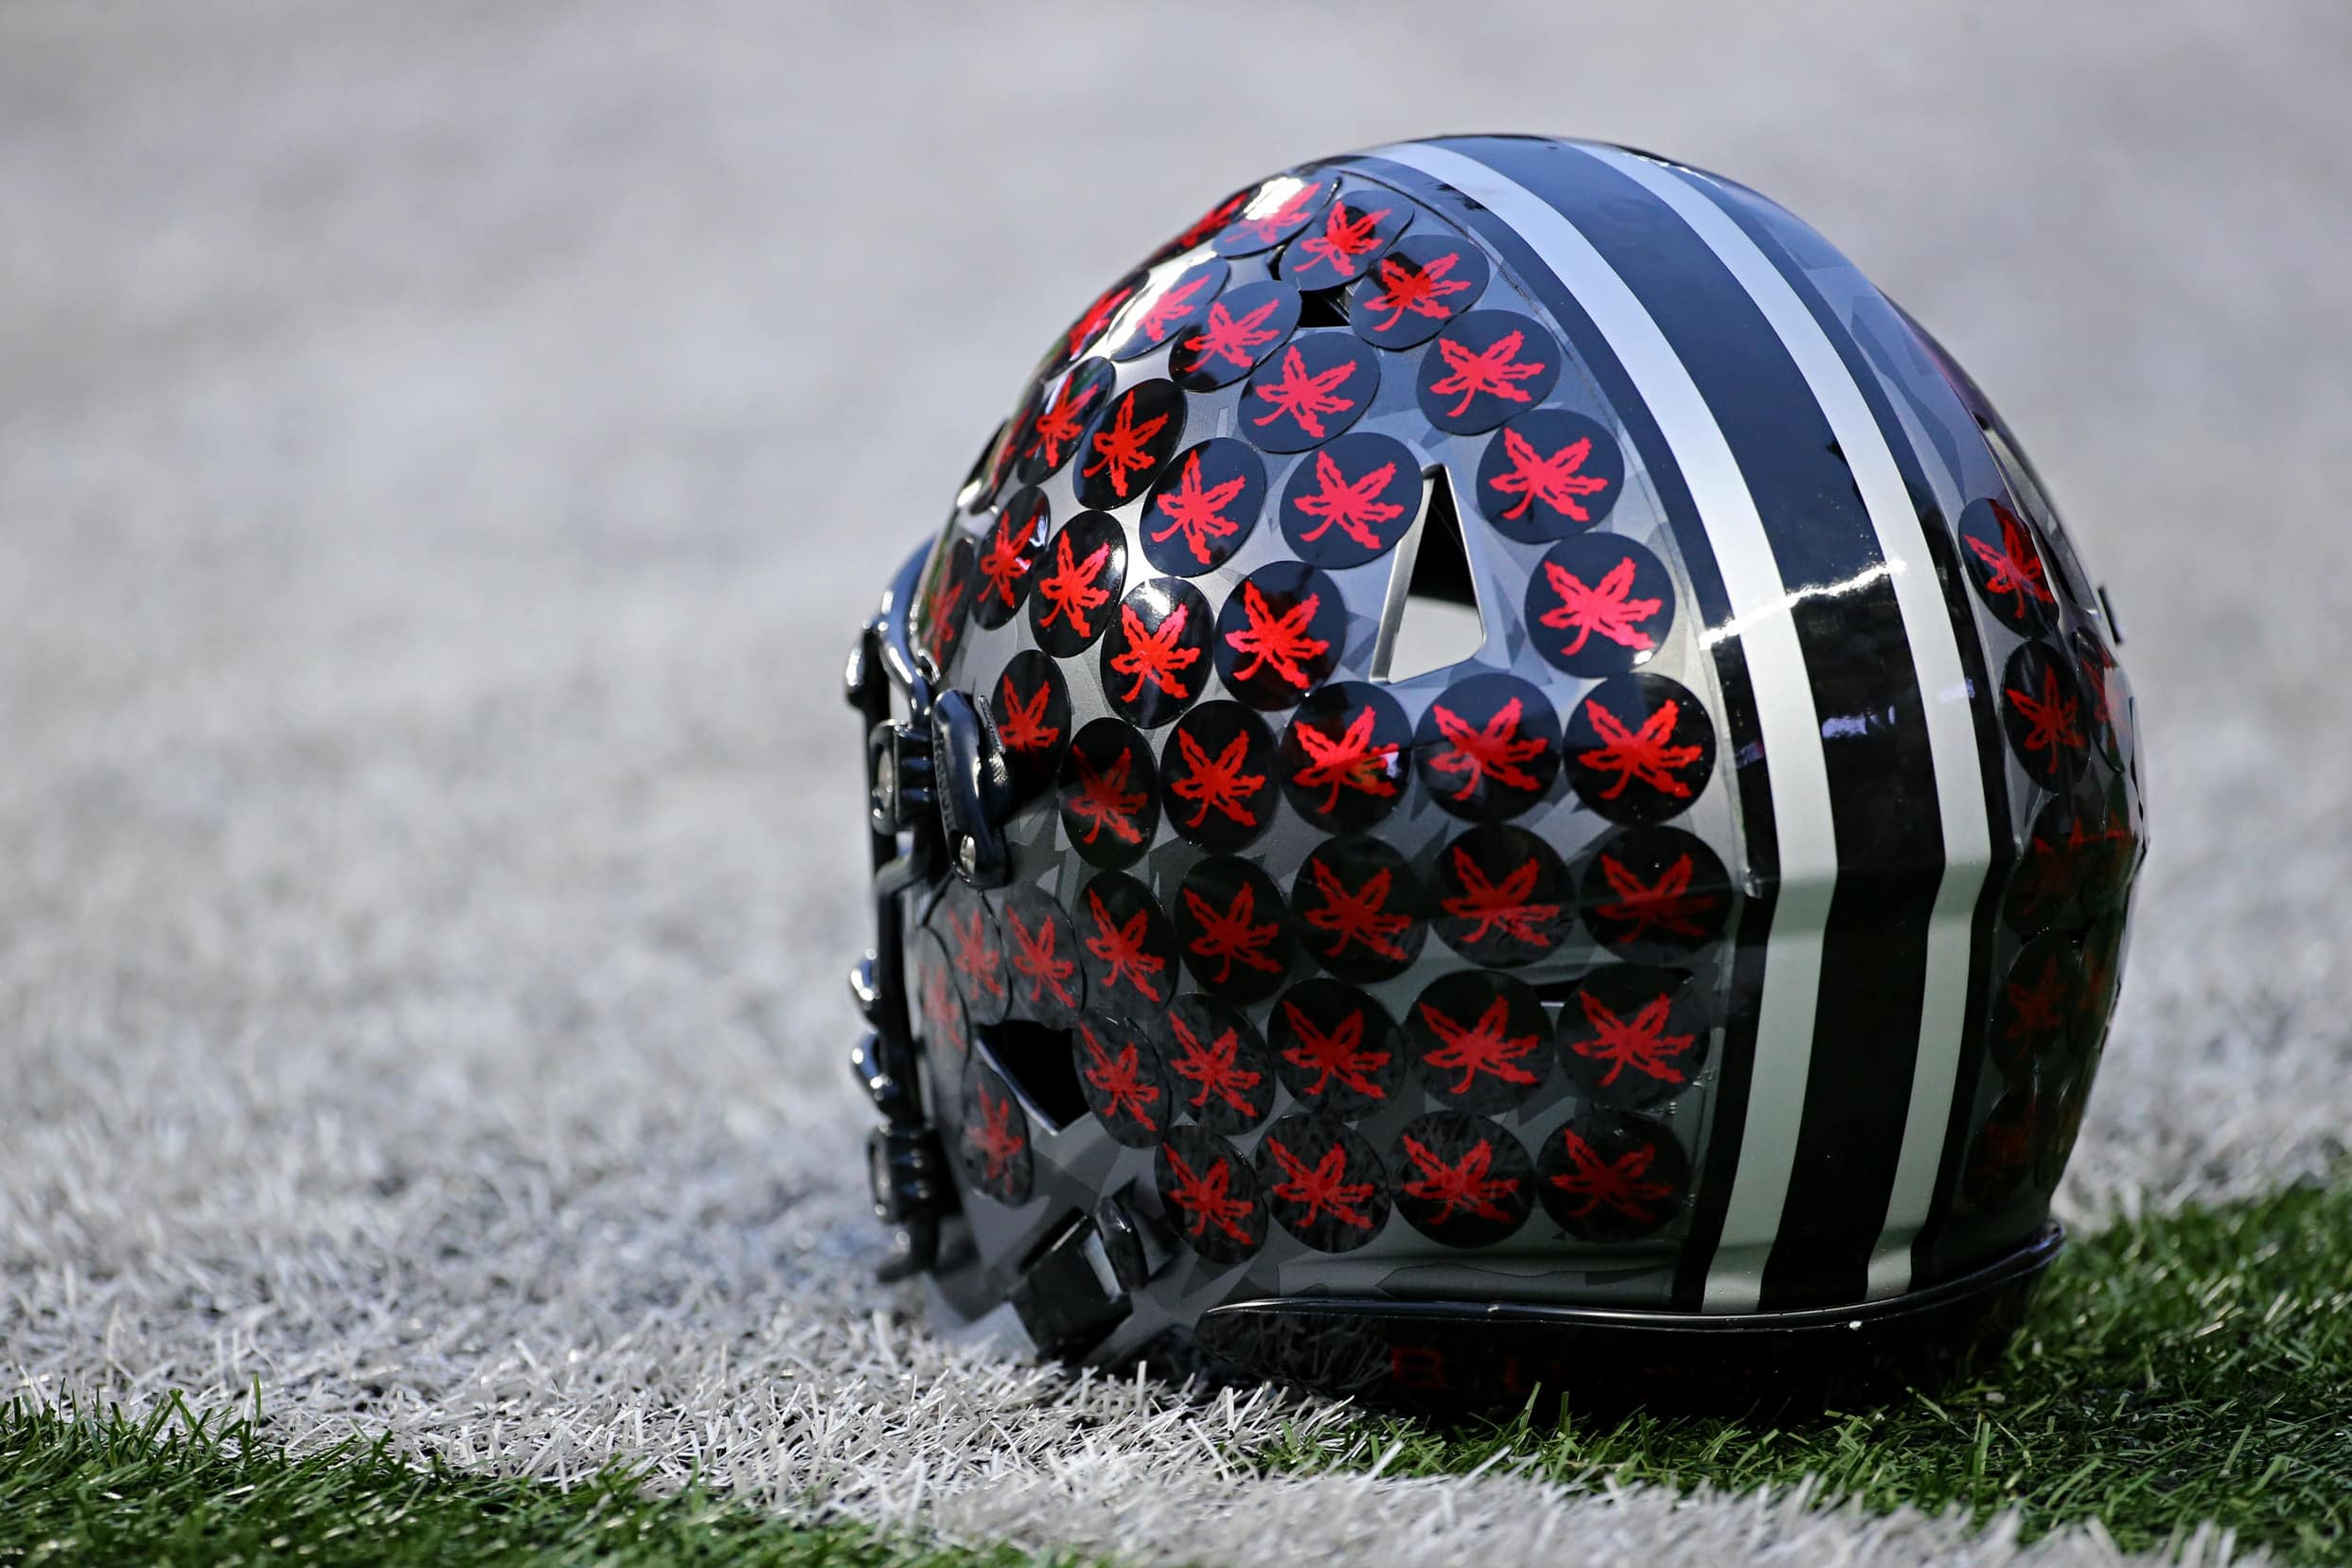 LOOK: Ohio State blackout uniforms for Nebraska game are amazing2485 x 1657